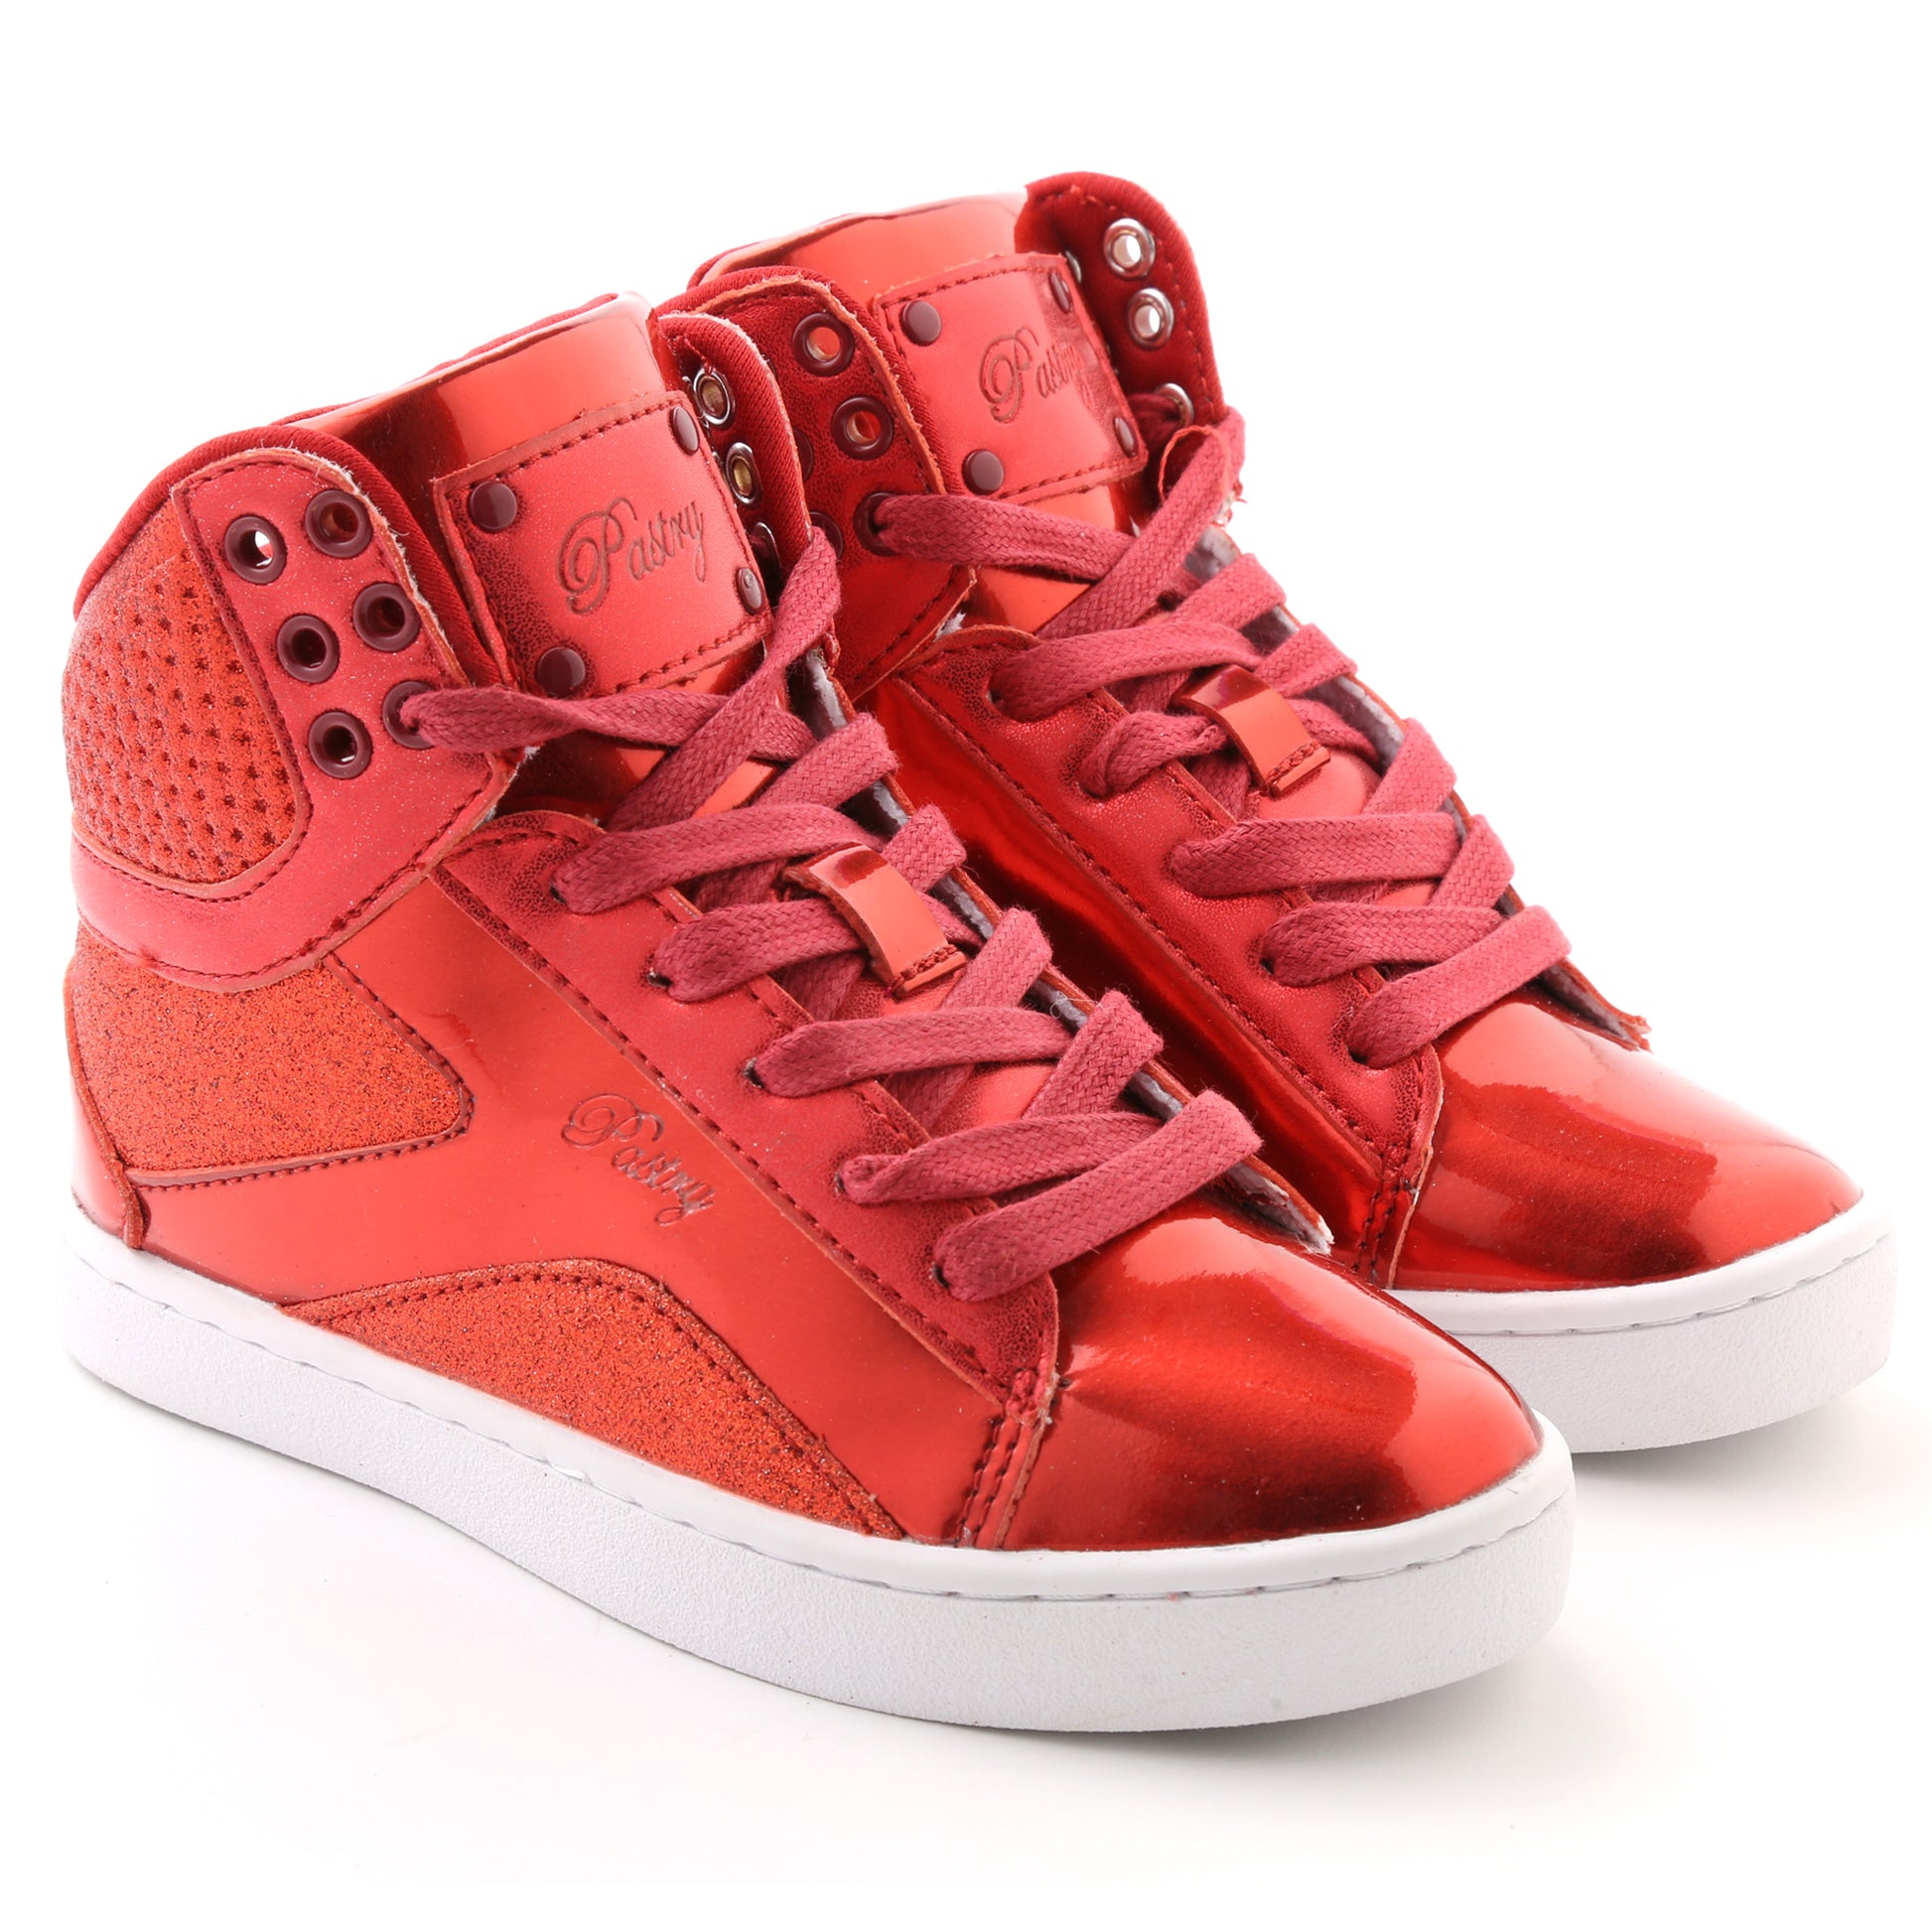 Pair of Pastry Pop Tart Glitter Youth Sneaker in Red in 3 quarter view